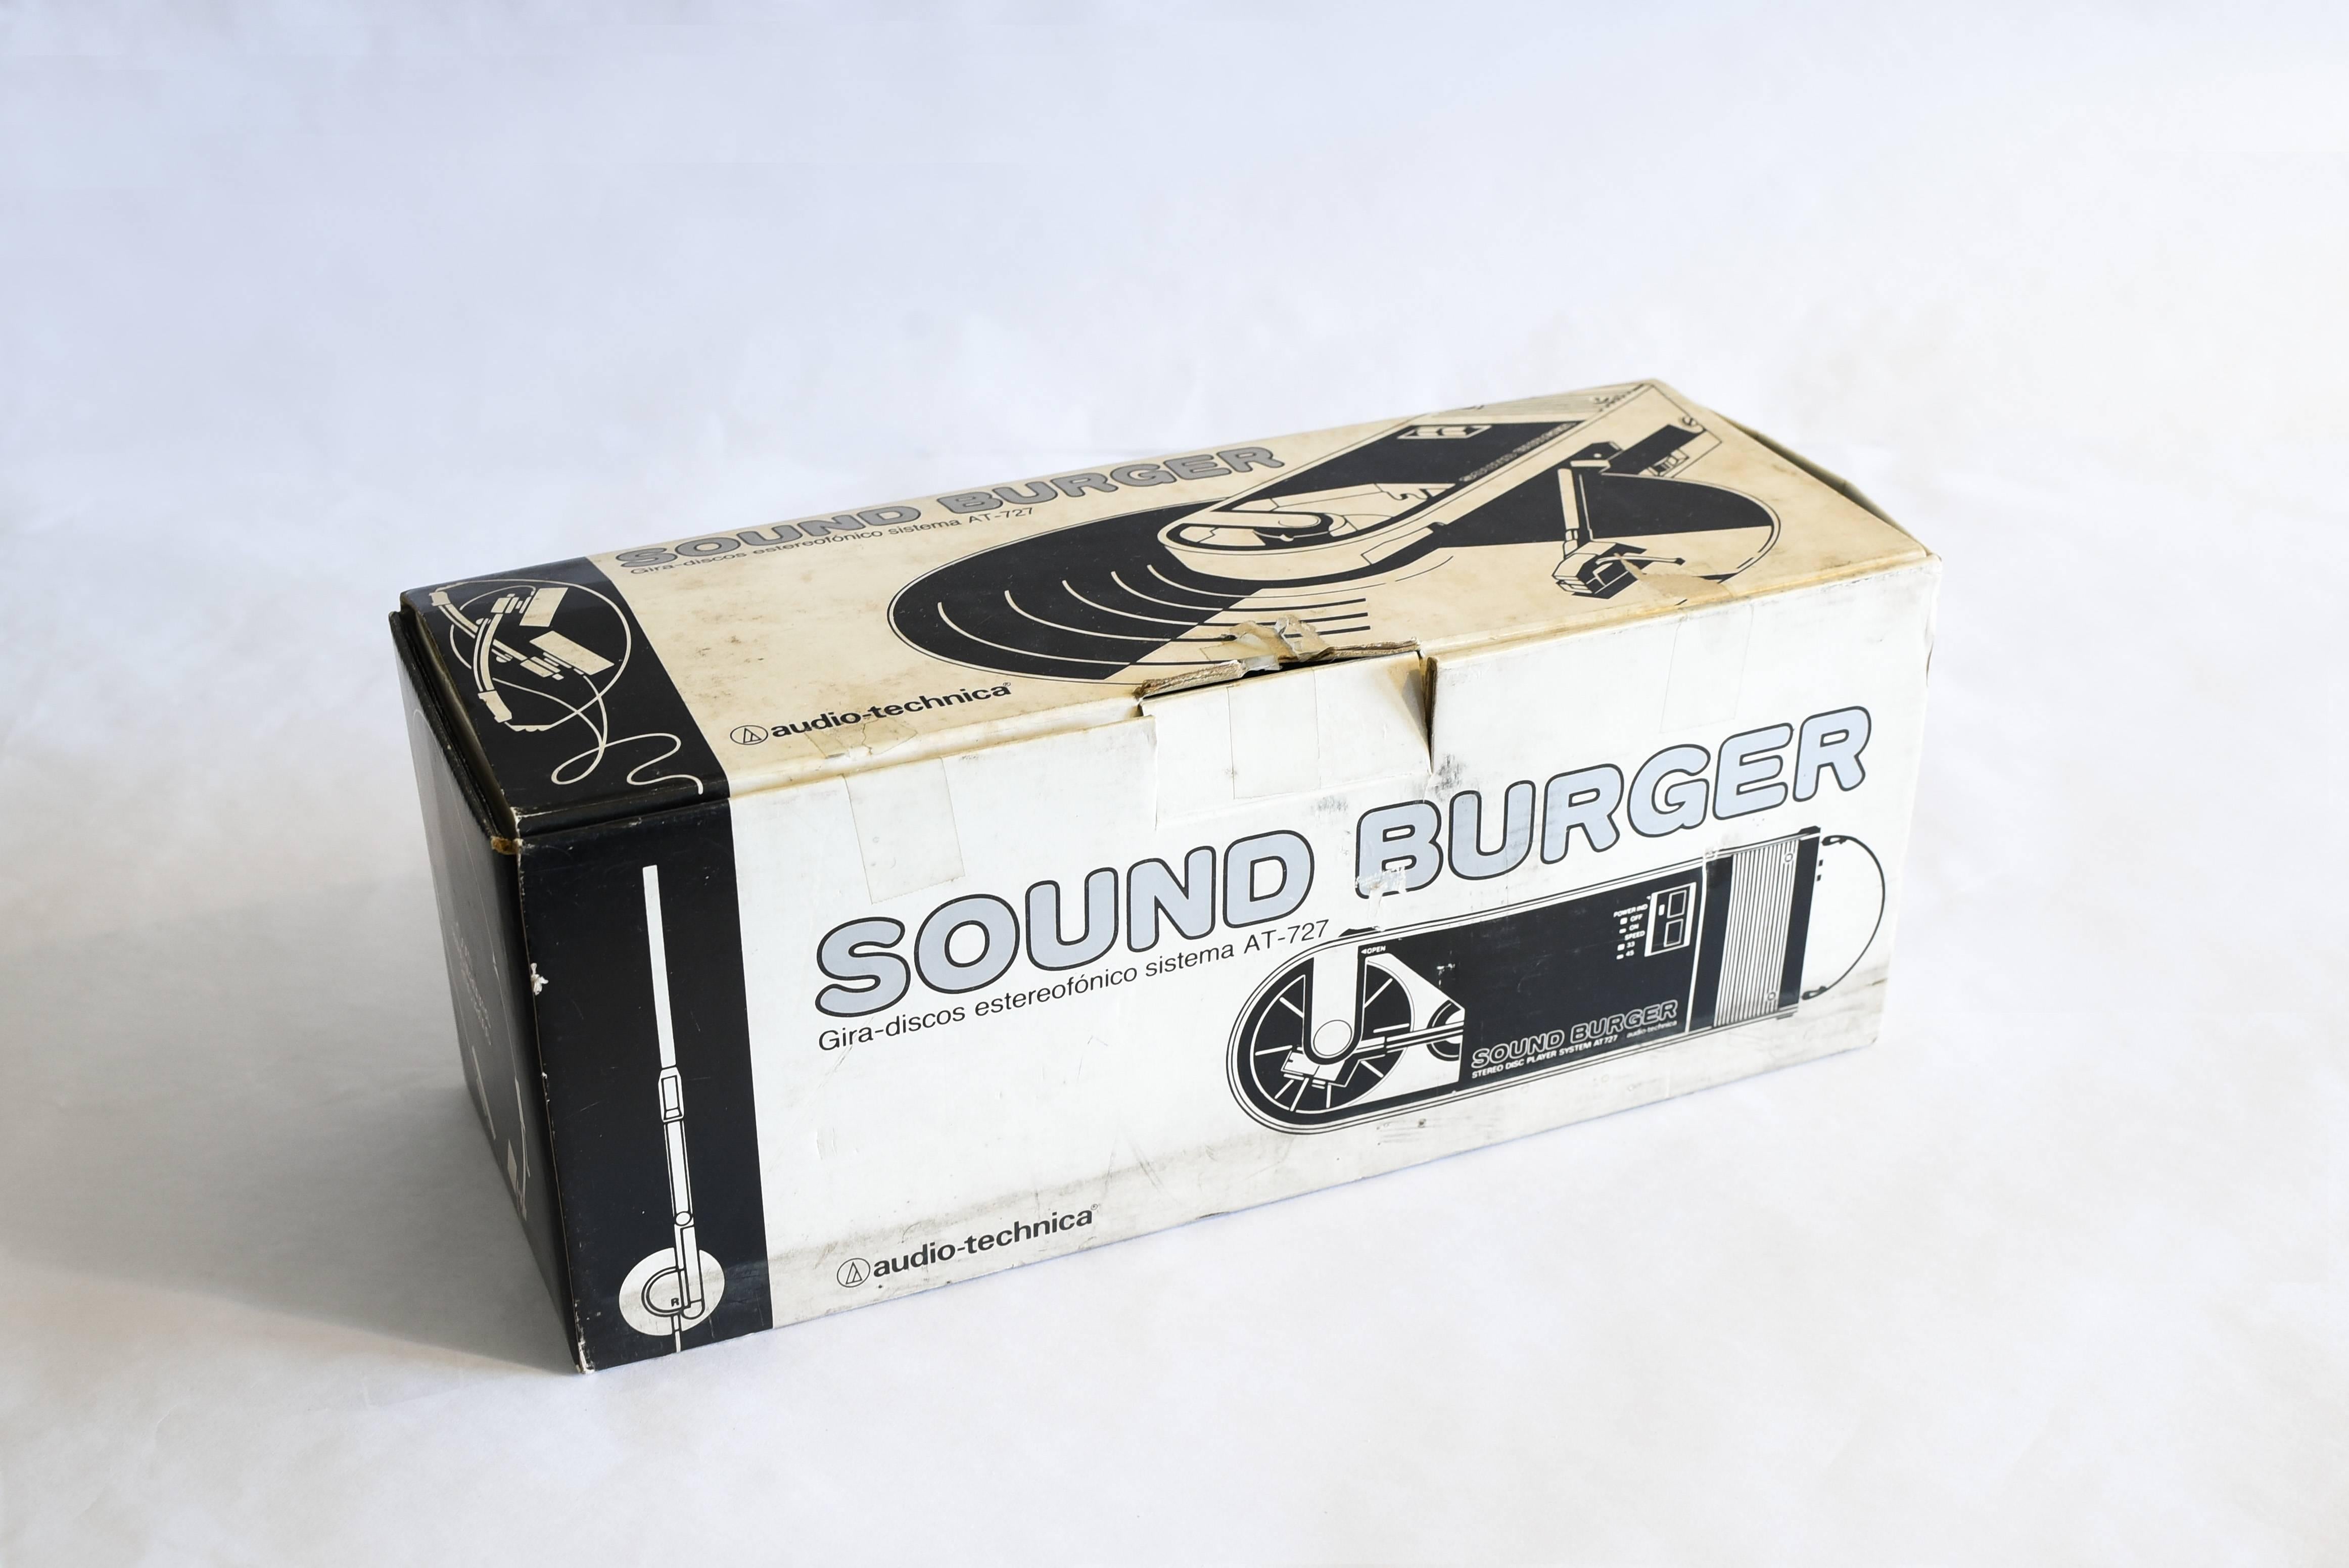 Japanese Vintage Sound Burger AT 727 Portable Record Player from Audio Technica